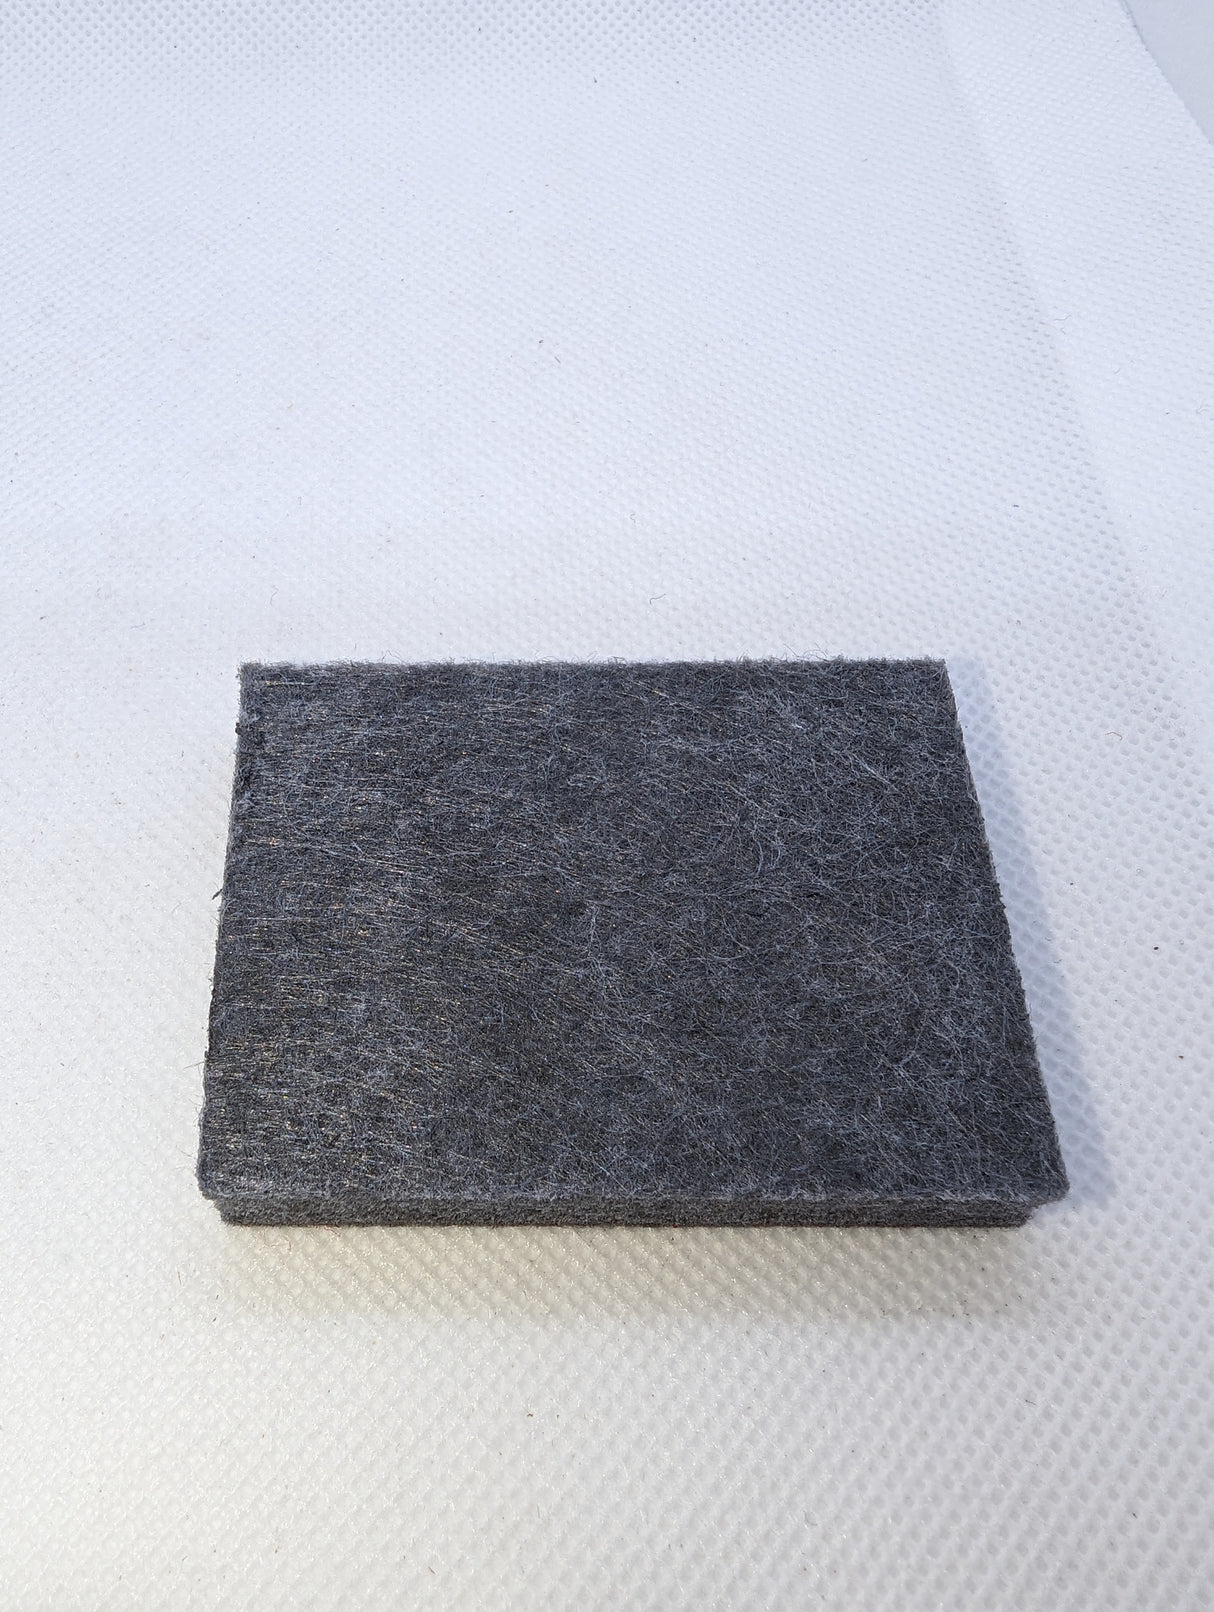 PolyColour Slate Grey Pinboard Fire Rated 2440x1220x9mm